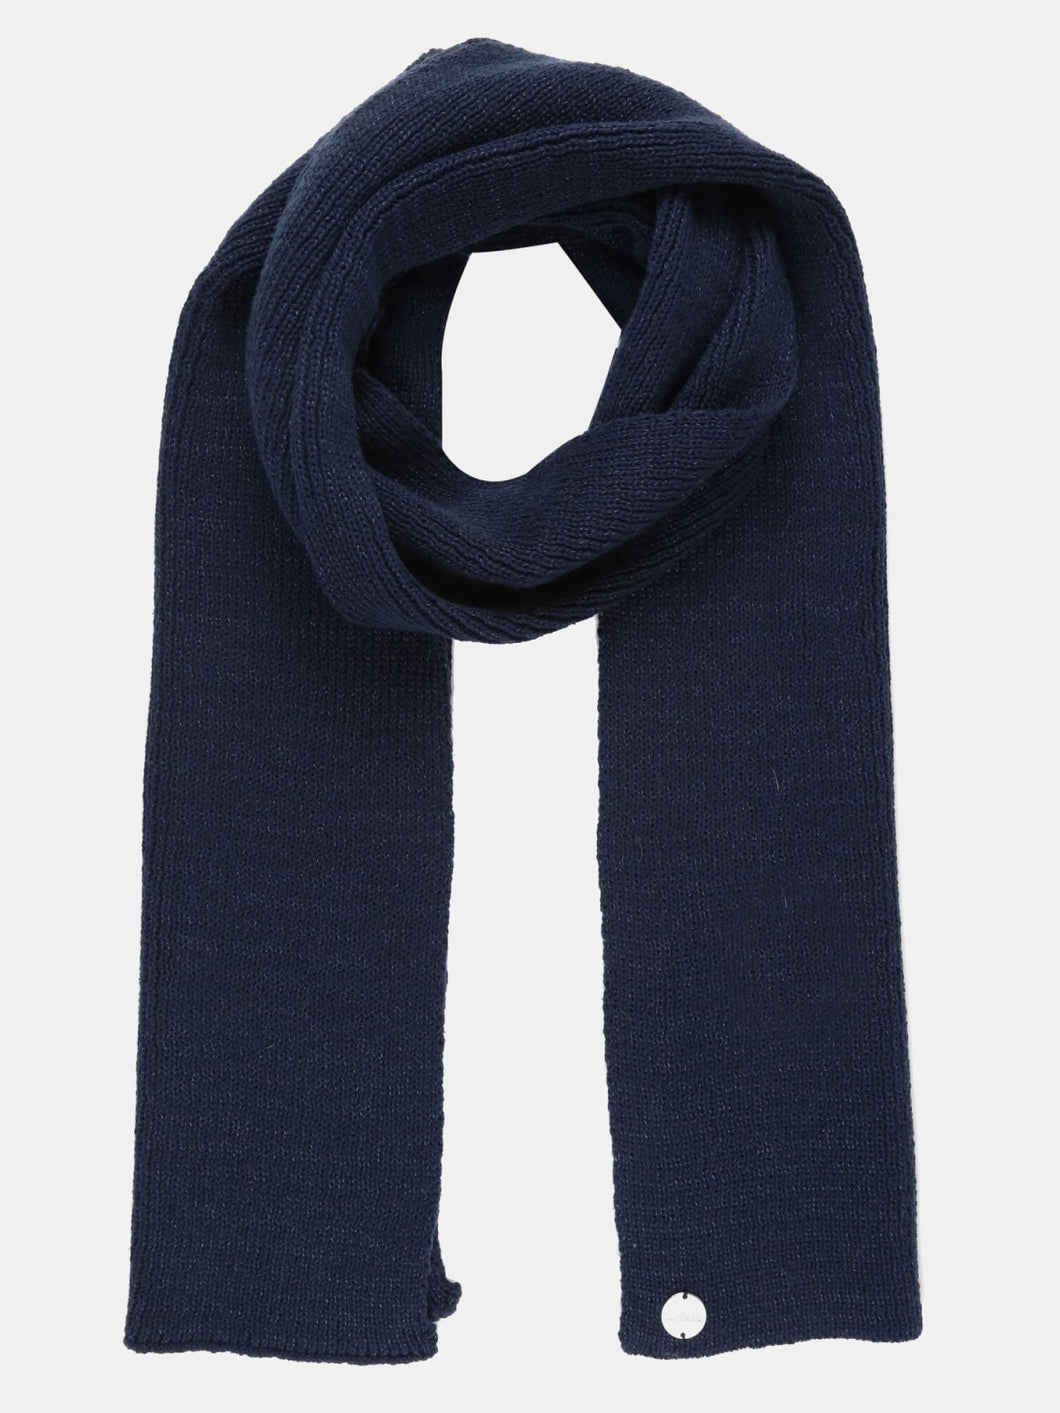 Womens/Ladies Multimix III Knitted Winter Scarf - Navy